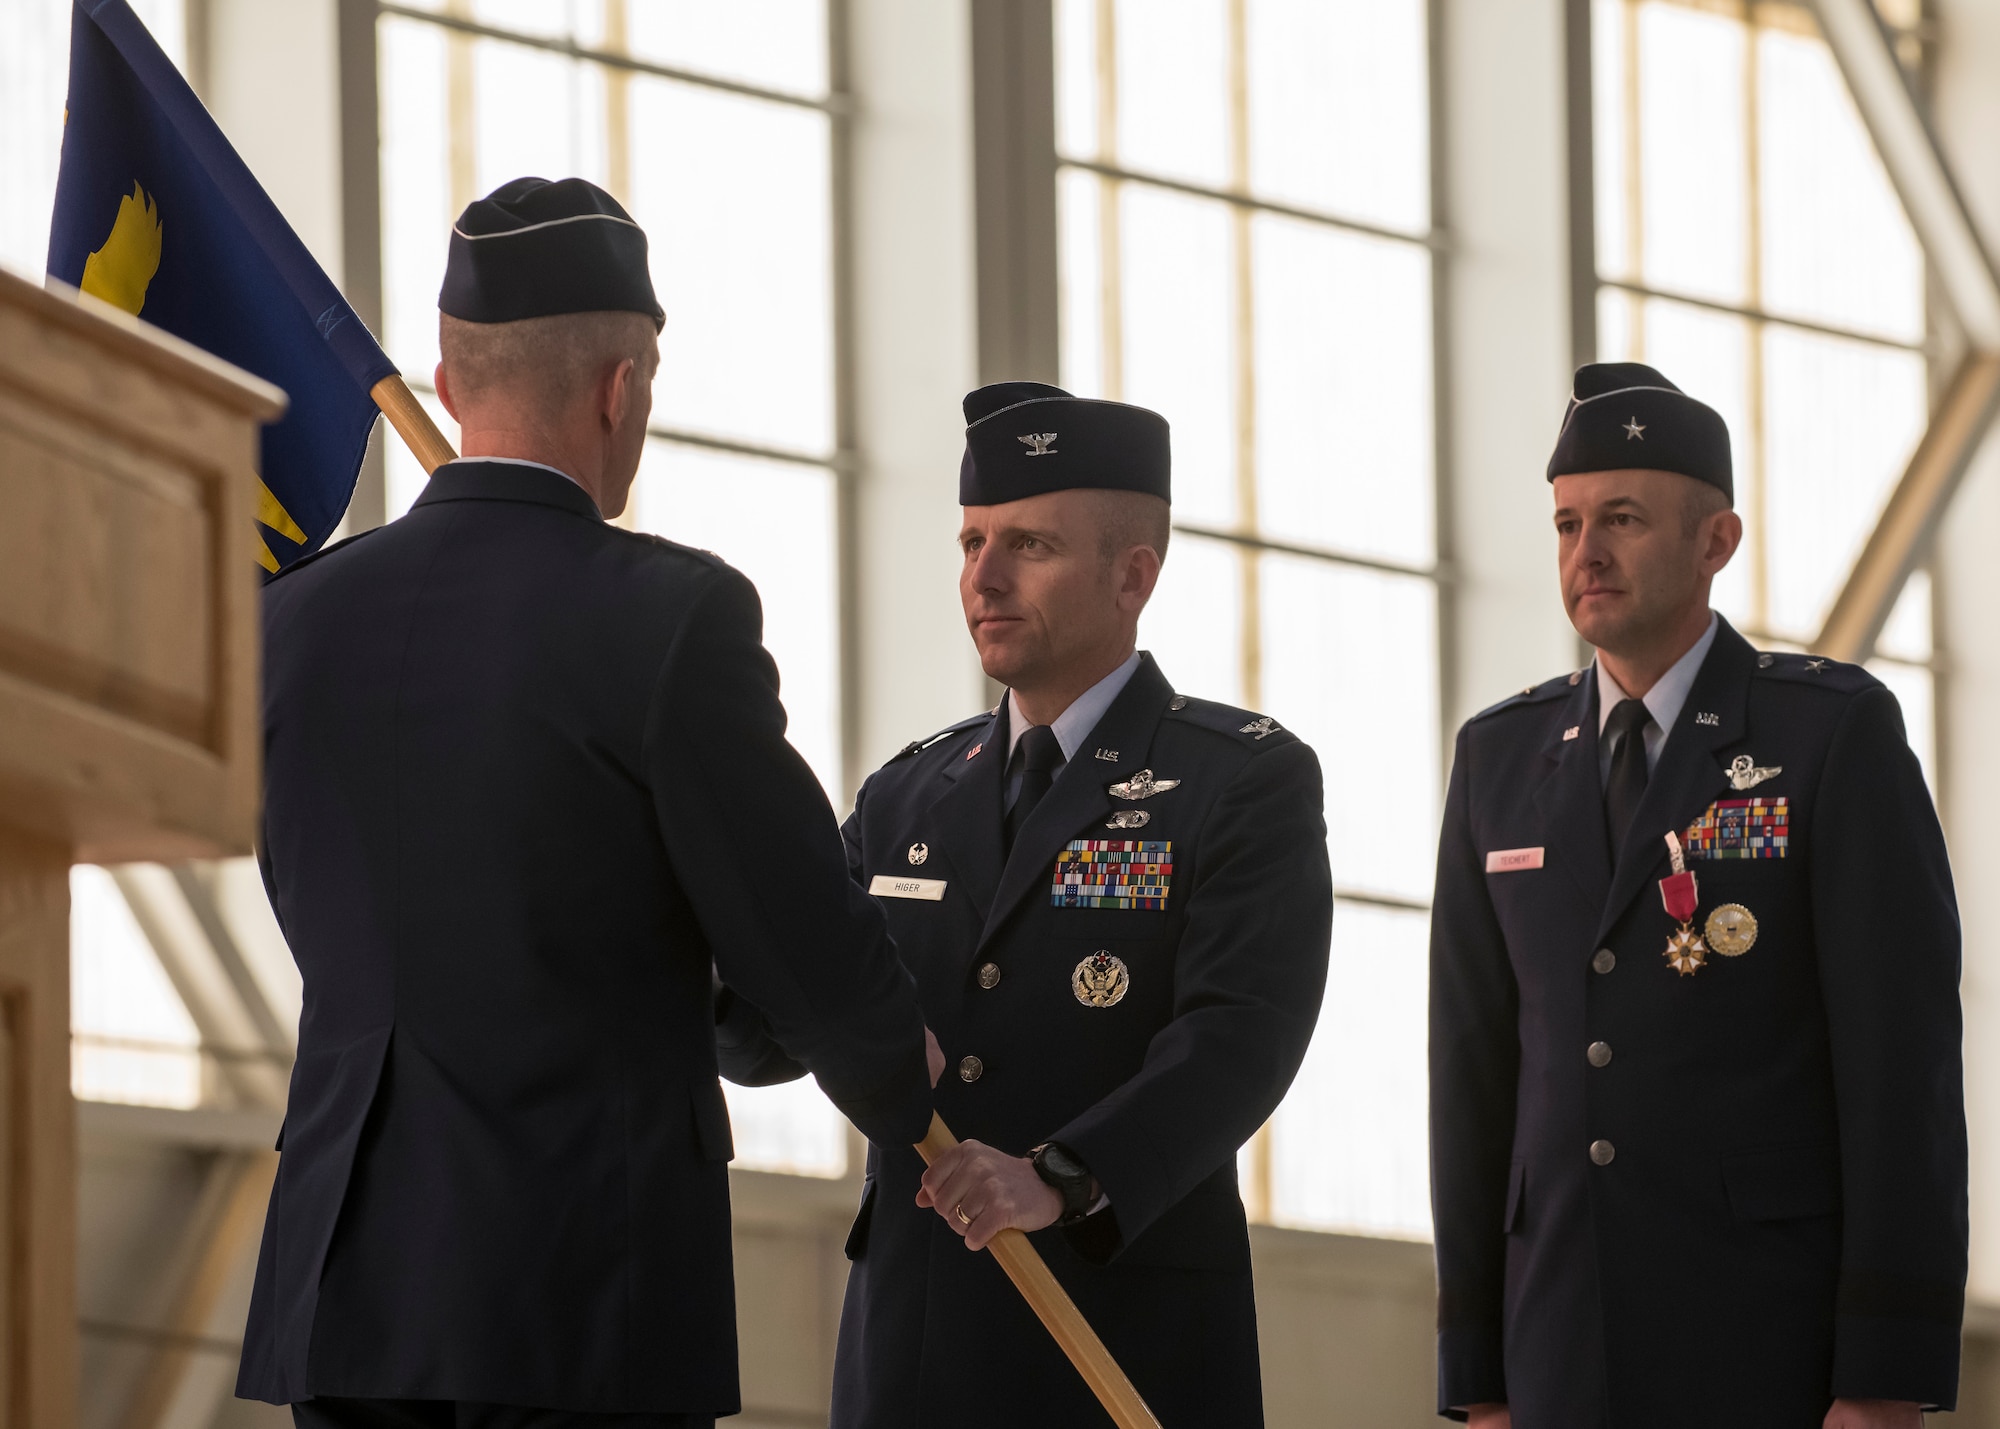 The 412th Test Wing’s new commander, Col. Matthew Higer, assumes command of the Wing by receiving the unit guidon from Maj. Gen. Christopher Azzano, Air Force Test Center Commander, during the Wing’s Change of Command Ceremony at Edwards Air Force Base, California, Feb. 5. (Air Force photo by Giancarlo Casem)